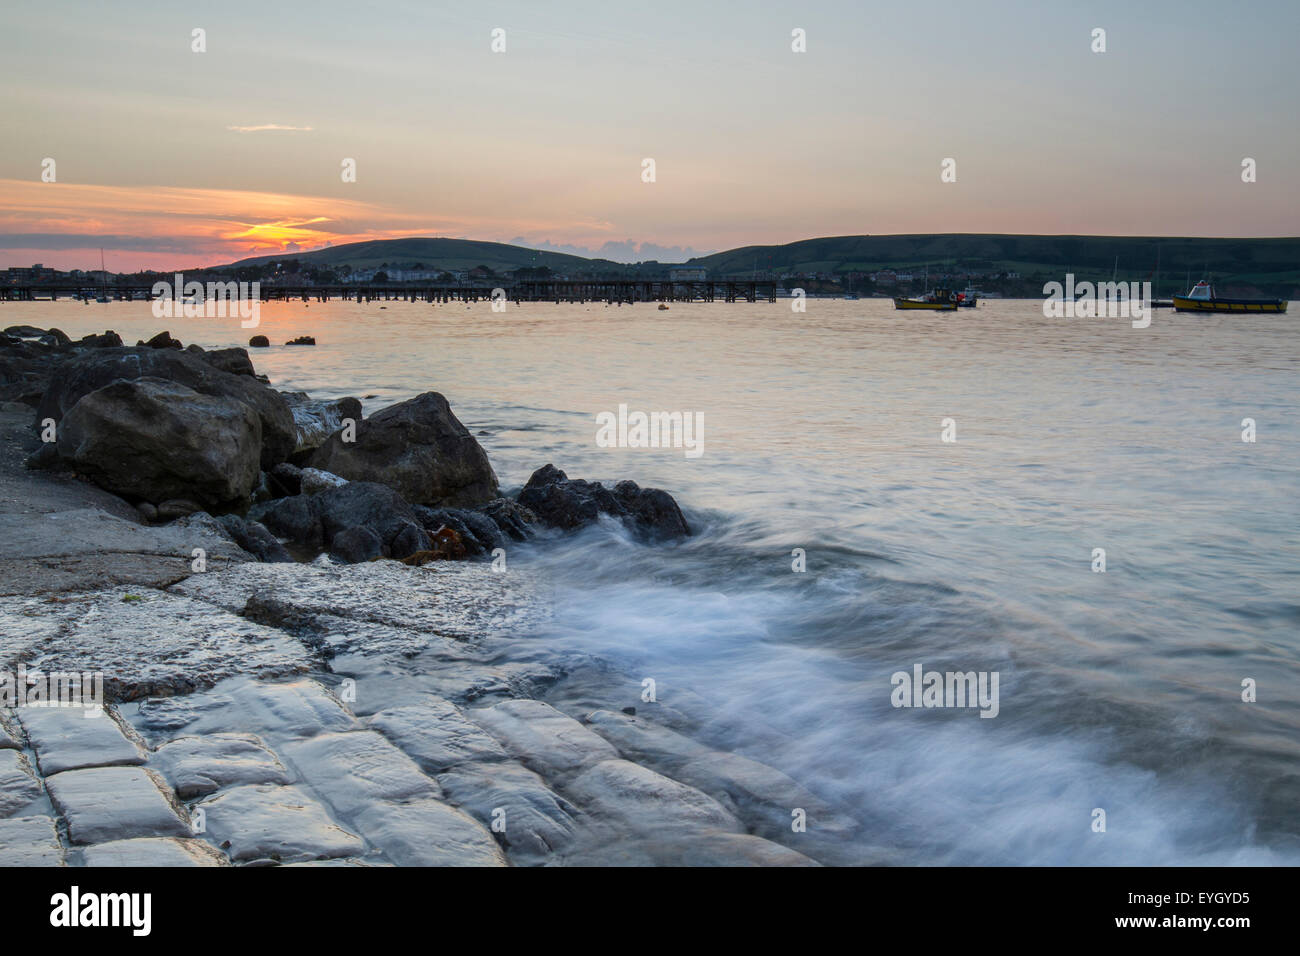 waves crashing on cobbled boat ramp at sunset in Swanage bay Stock Photo